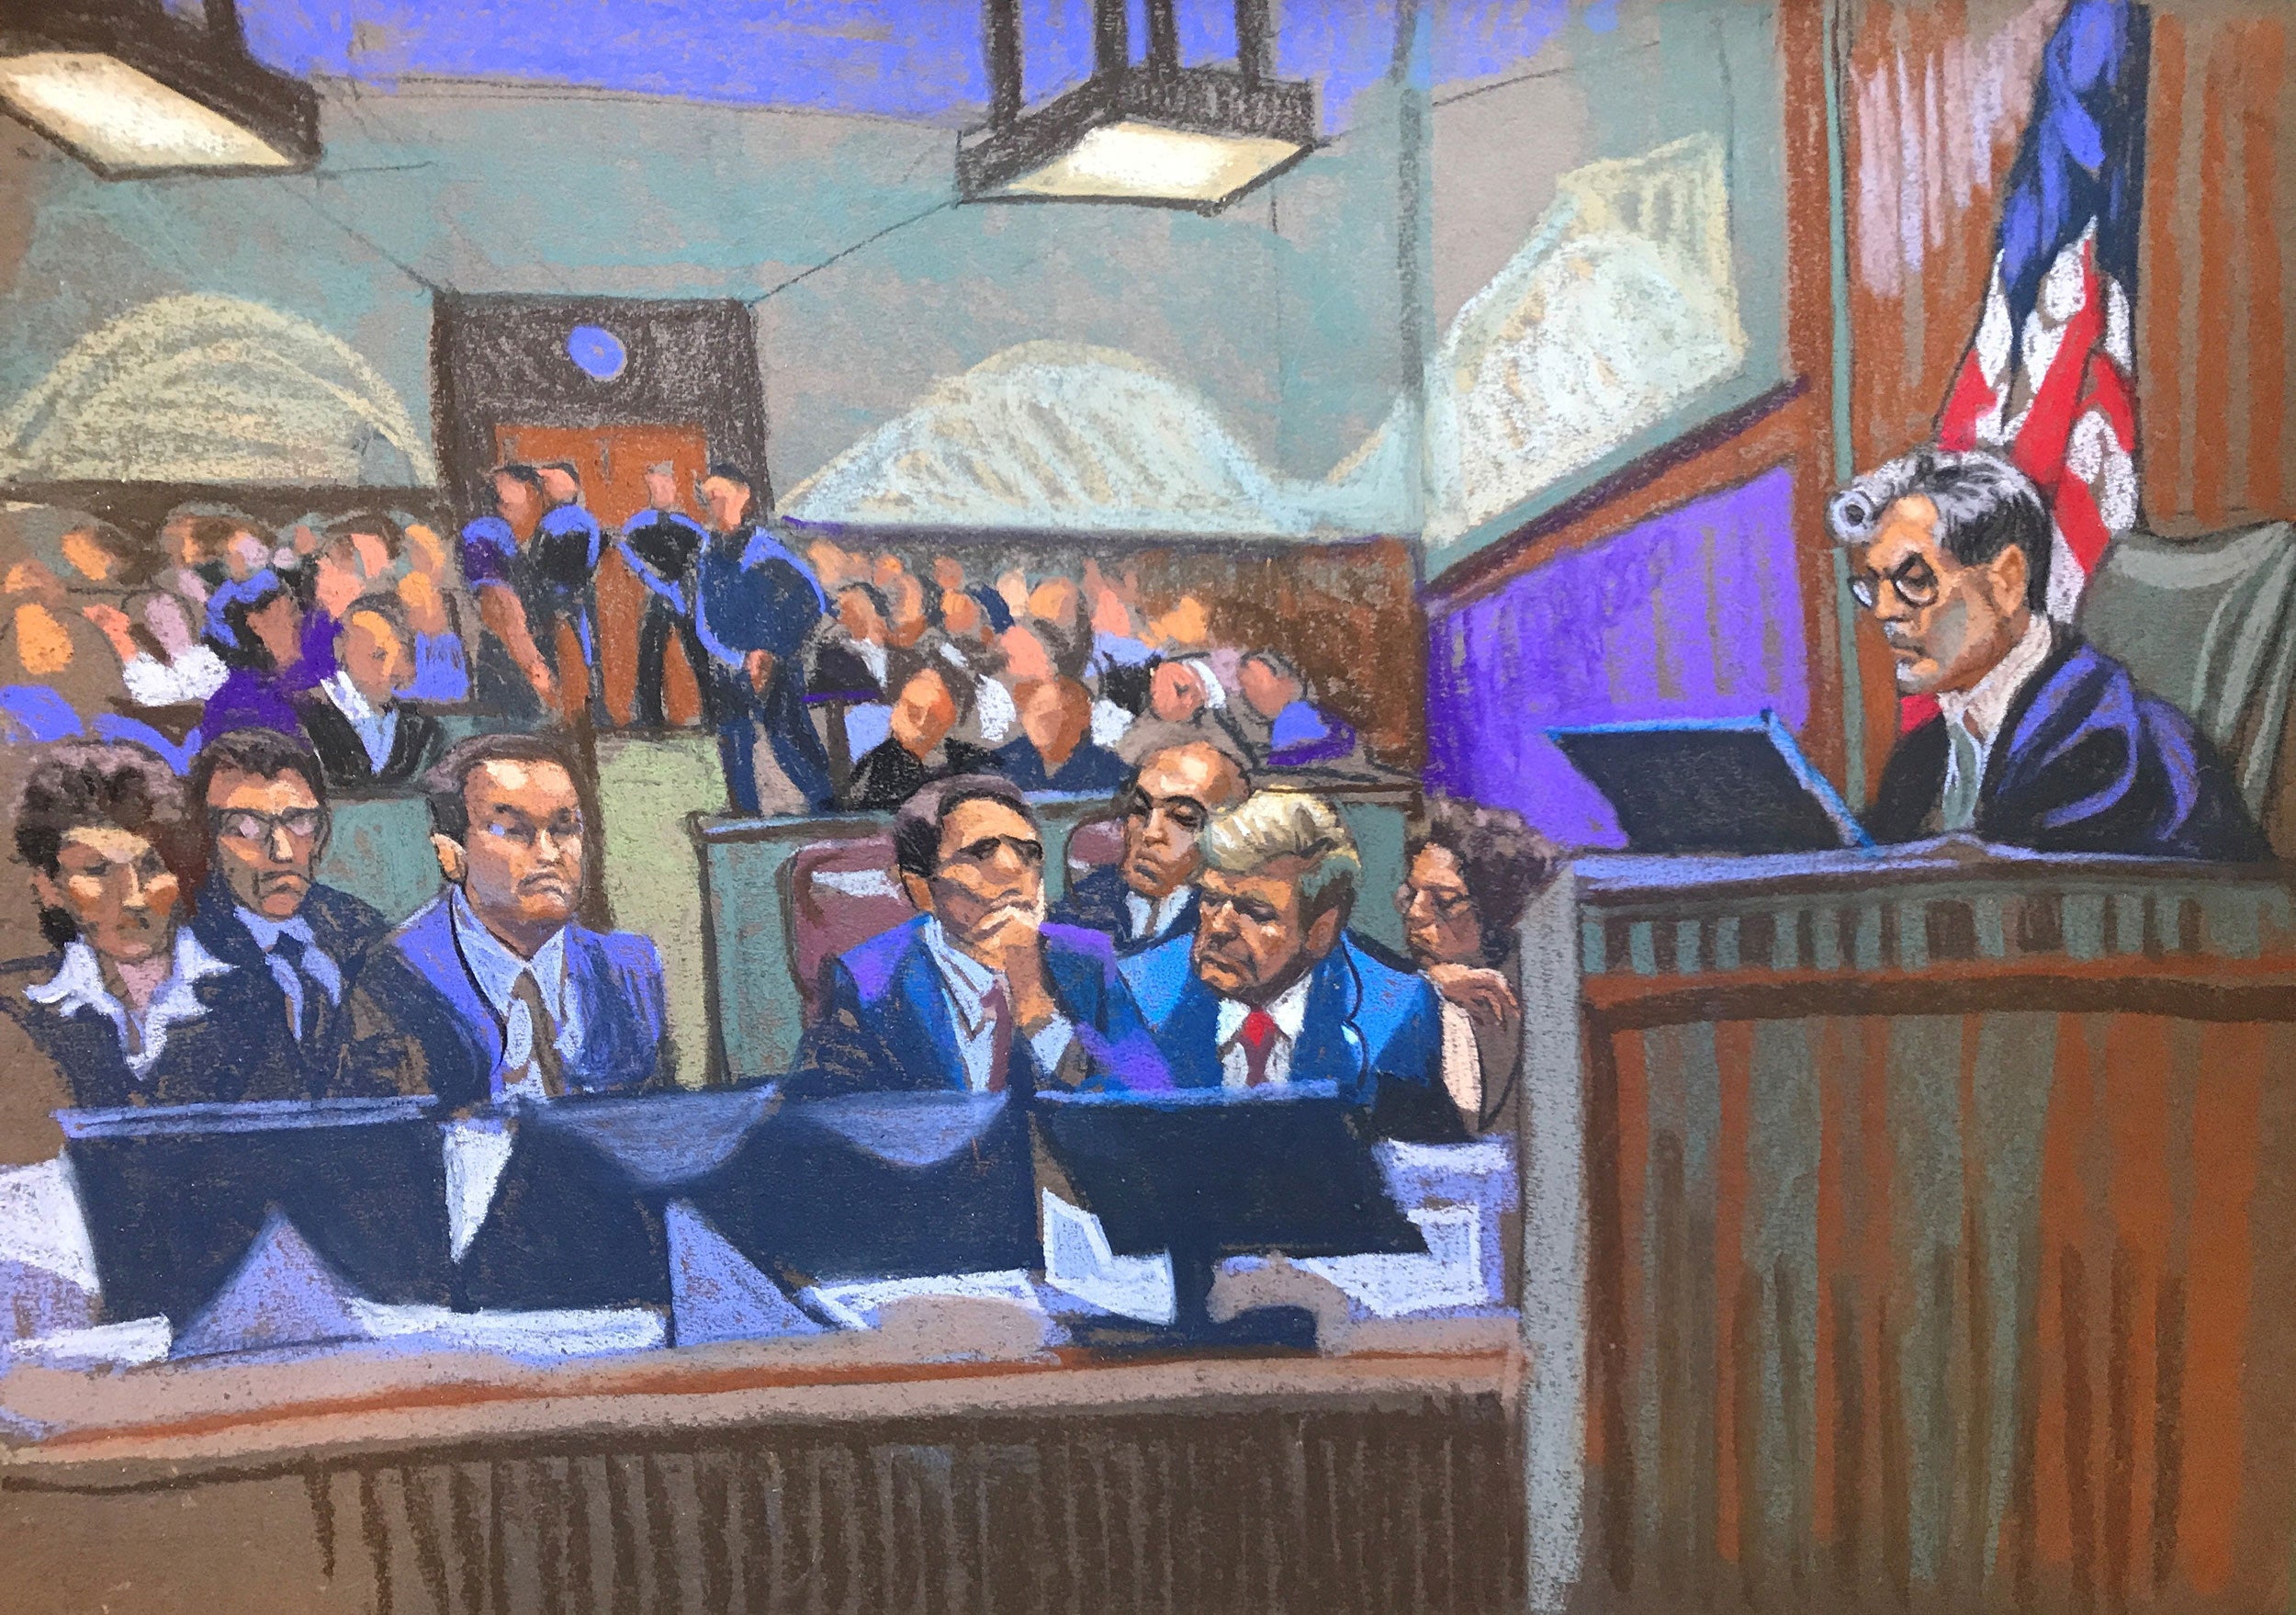 An evocative overview of the scene inside Juan Merchan’s courtroom, with Donald Trump and his defence attorneys assembled on the front bench